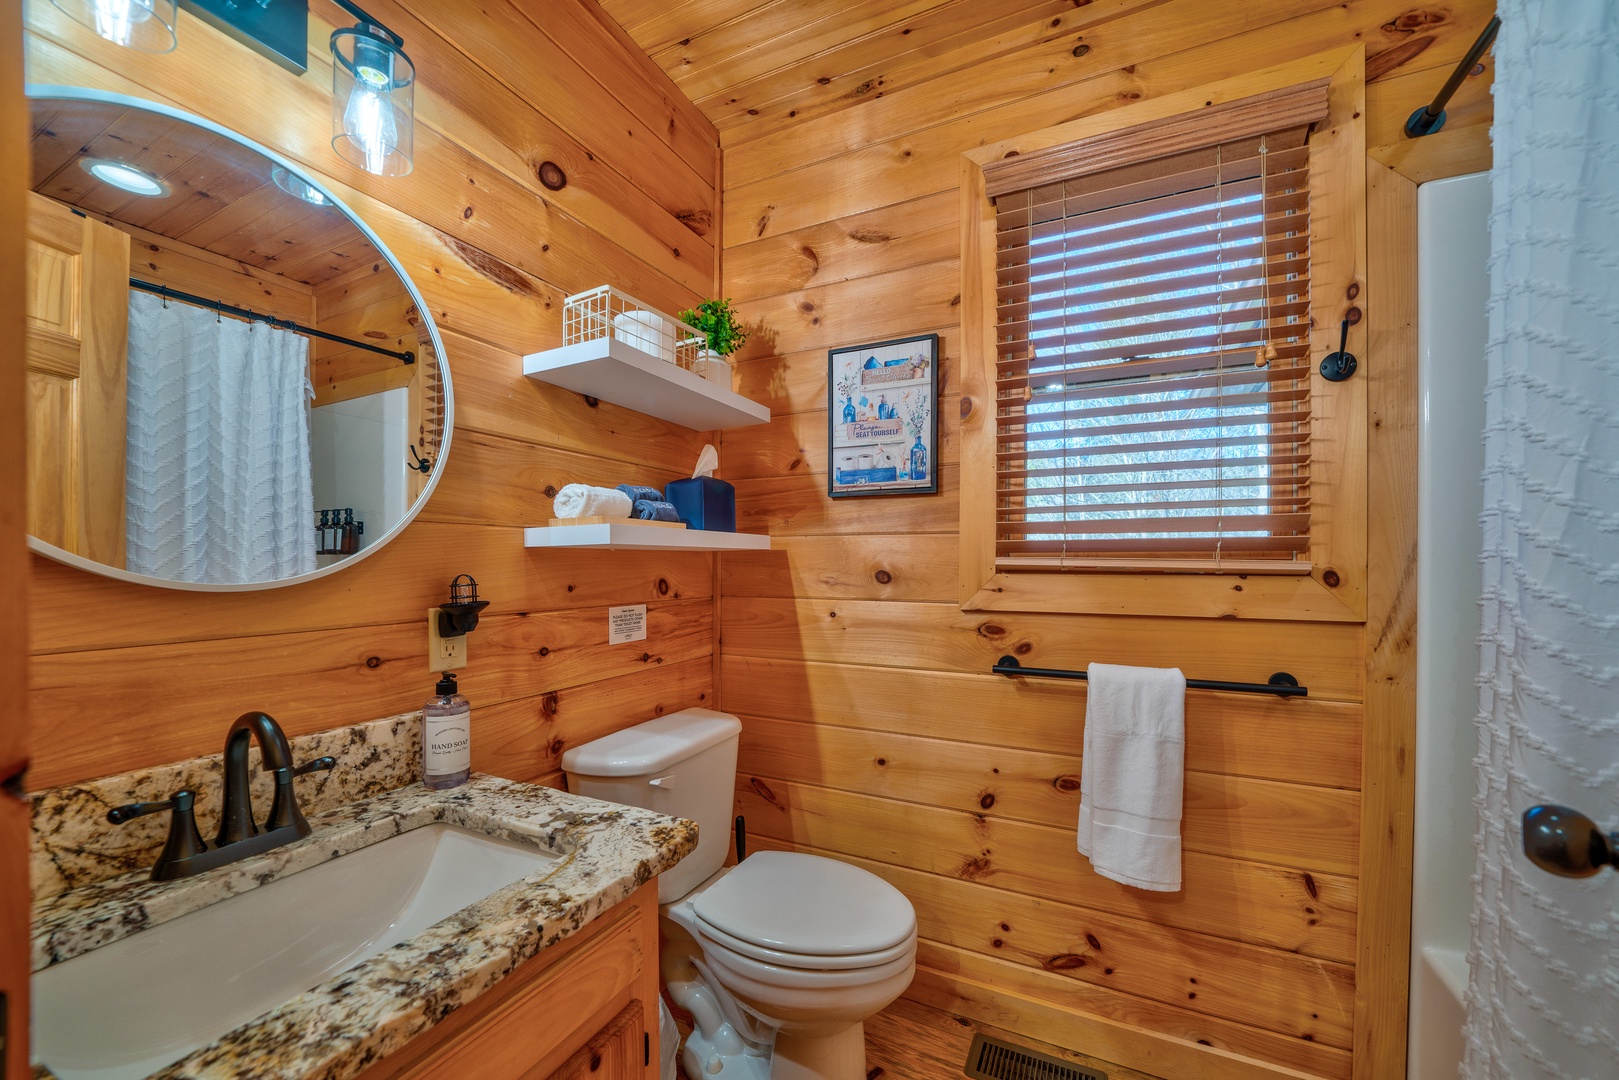 Shared full bathroom with stand up shower off of the laundry area